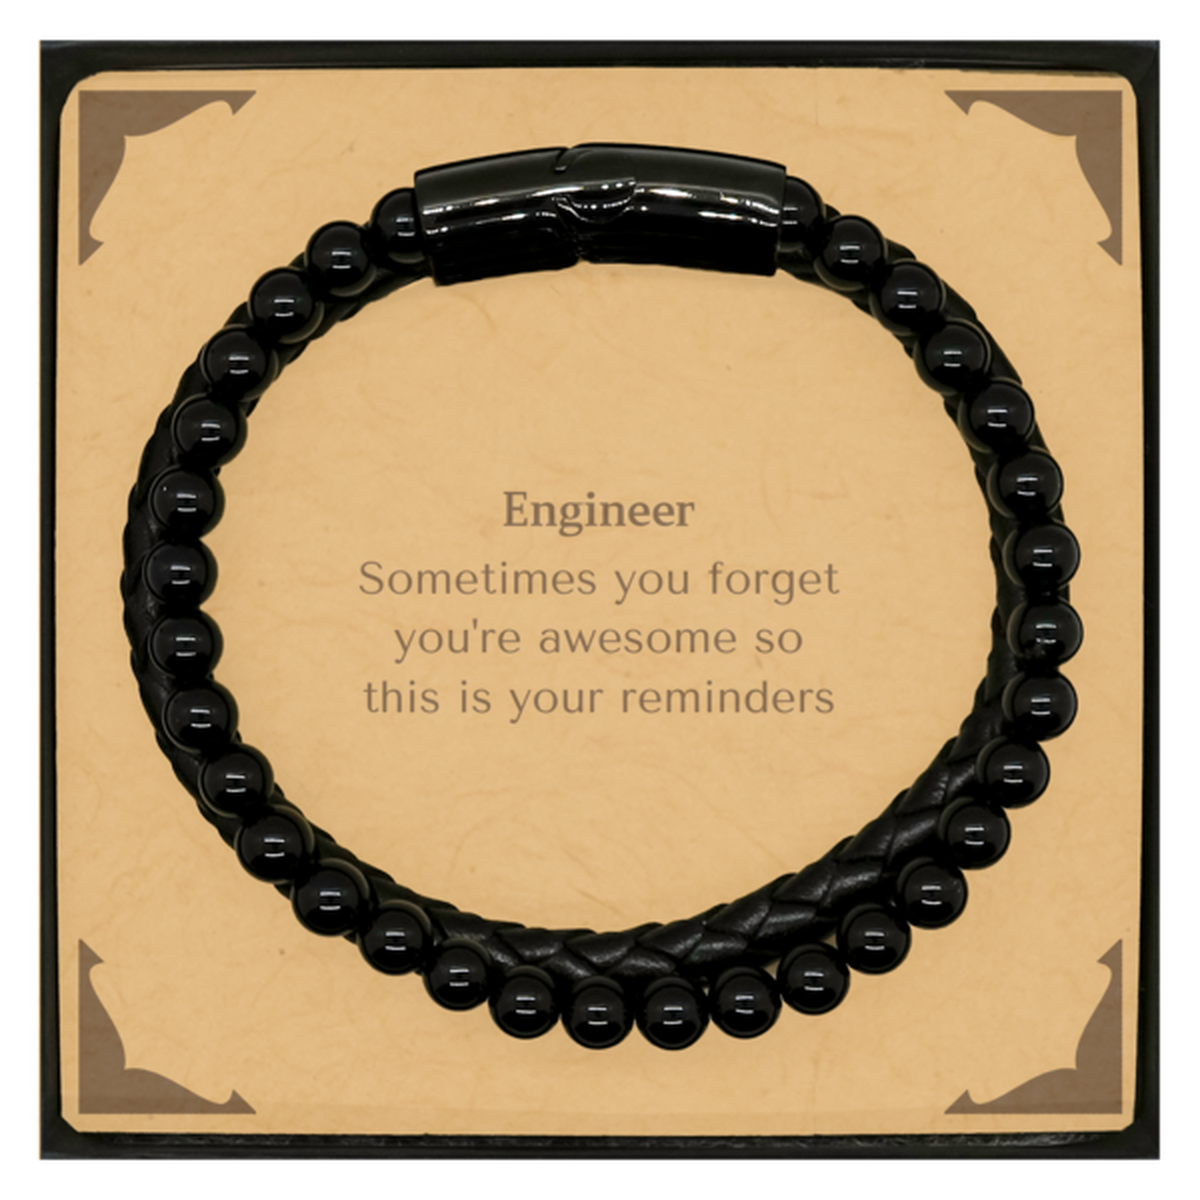 Sentimental Engineer Stone Leather Bracelets, Engineer Sometimes you forget you're awesome so this is your reminders, Graduation Christmas Birthday Gifts for Engineer, Men, Women, Coworkers